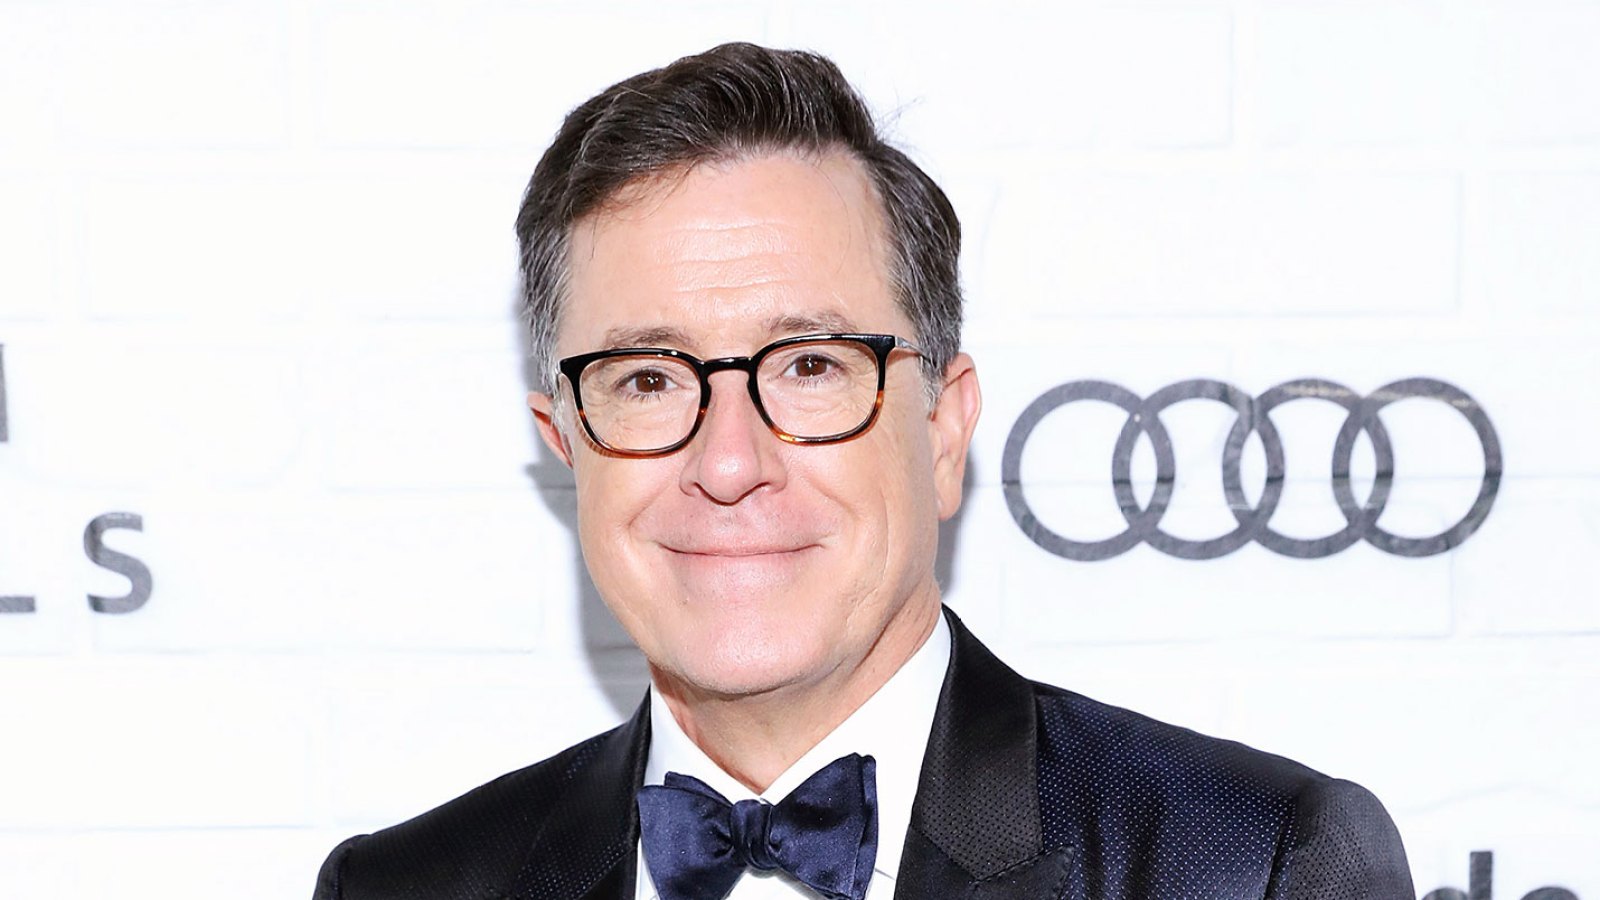 Watch Stephen Colbert Use His Wifes Makeup to Return Face to Normal